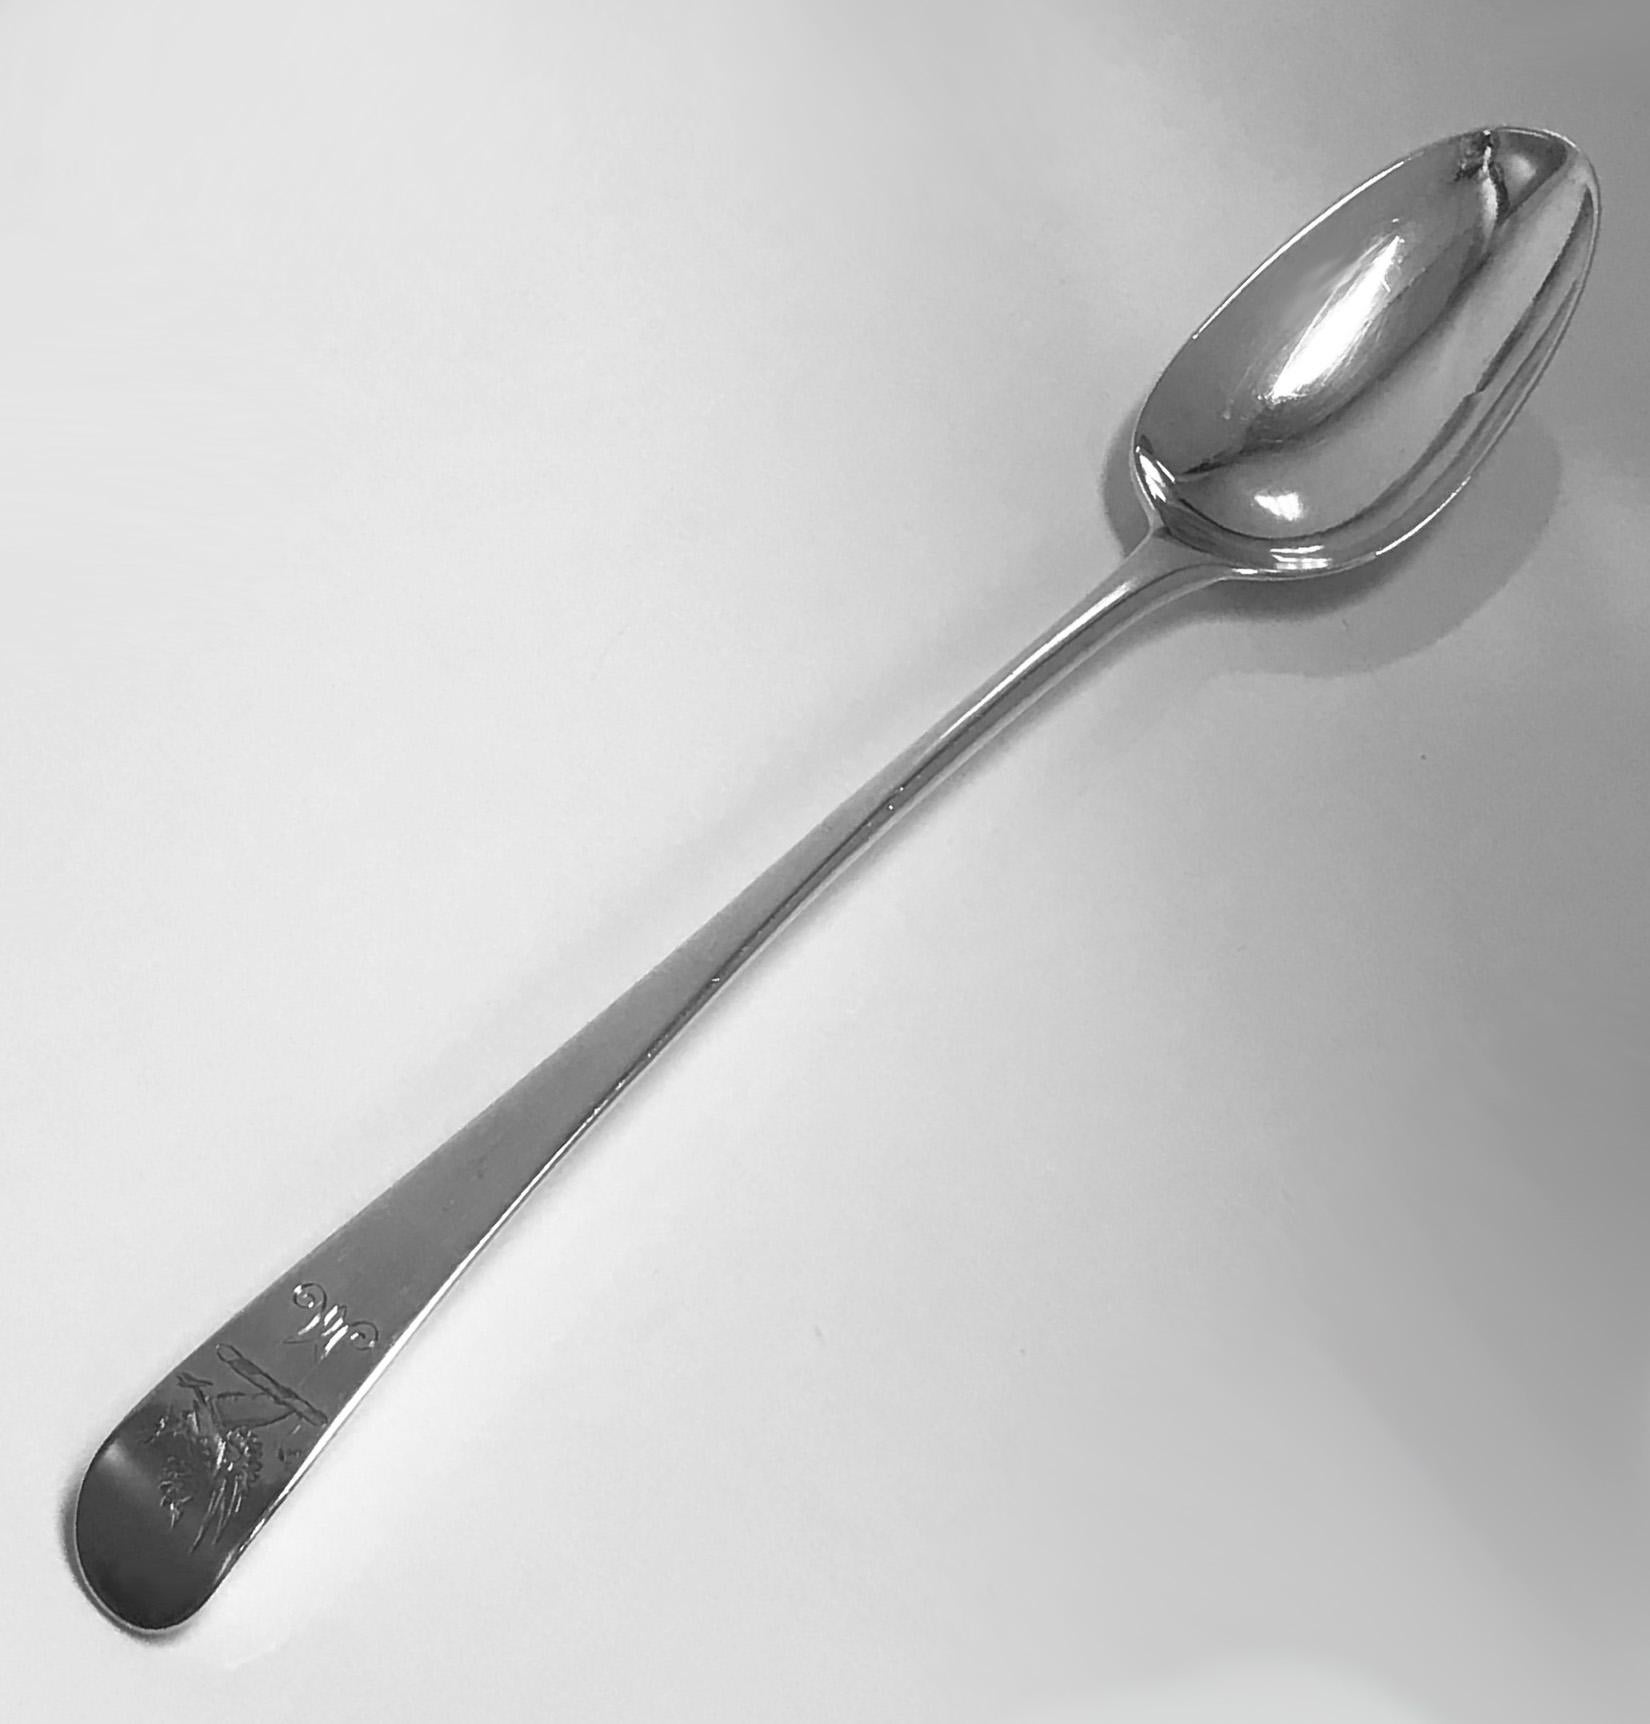 18th century Georgian silver basting spoon, London 1776 Stephen Adams, crest that of a demi griffin with extended claws above initial M. Measures: Length 11.25 inches, Weight: 107.43 grams.